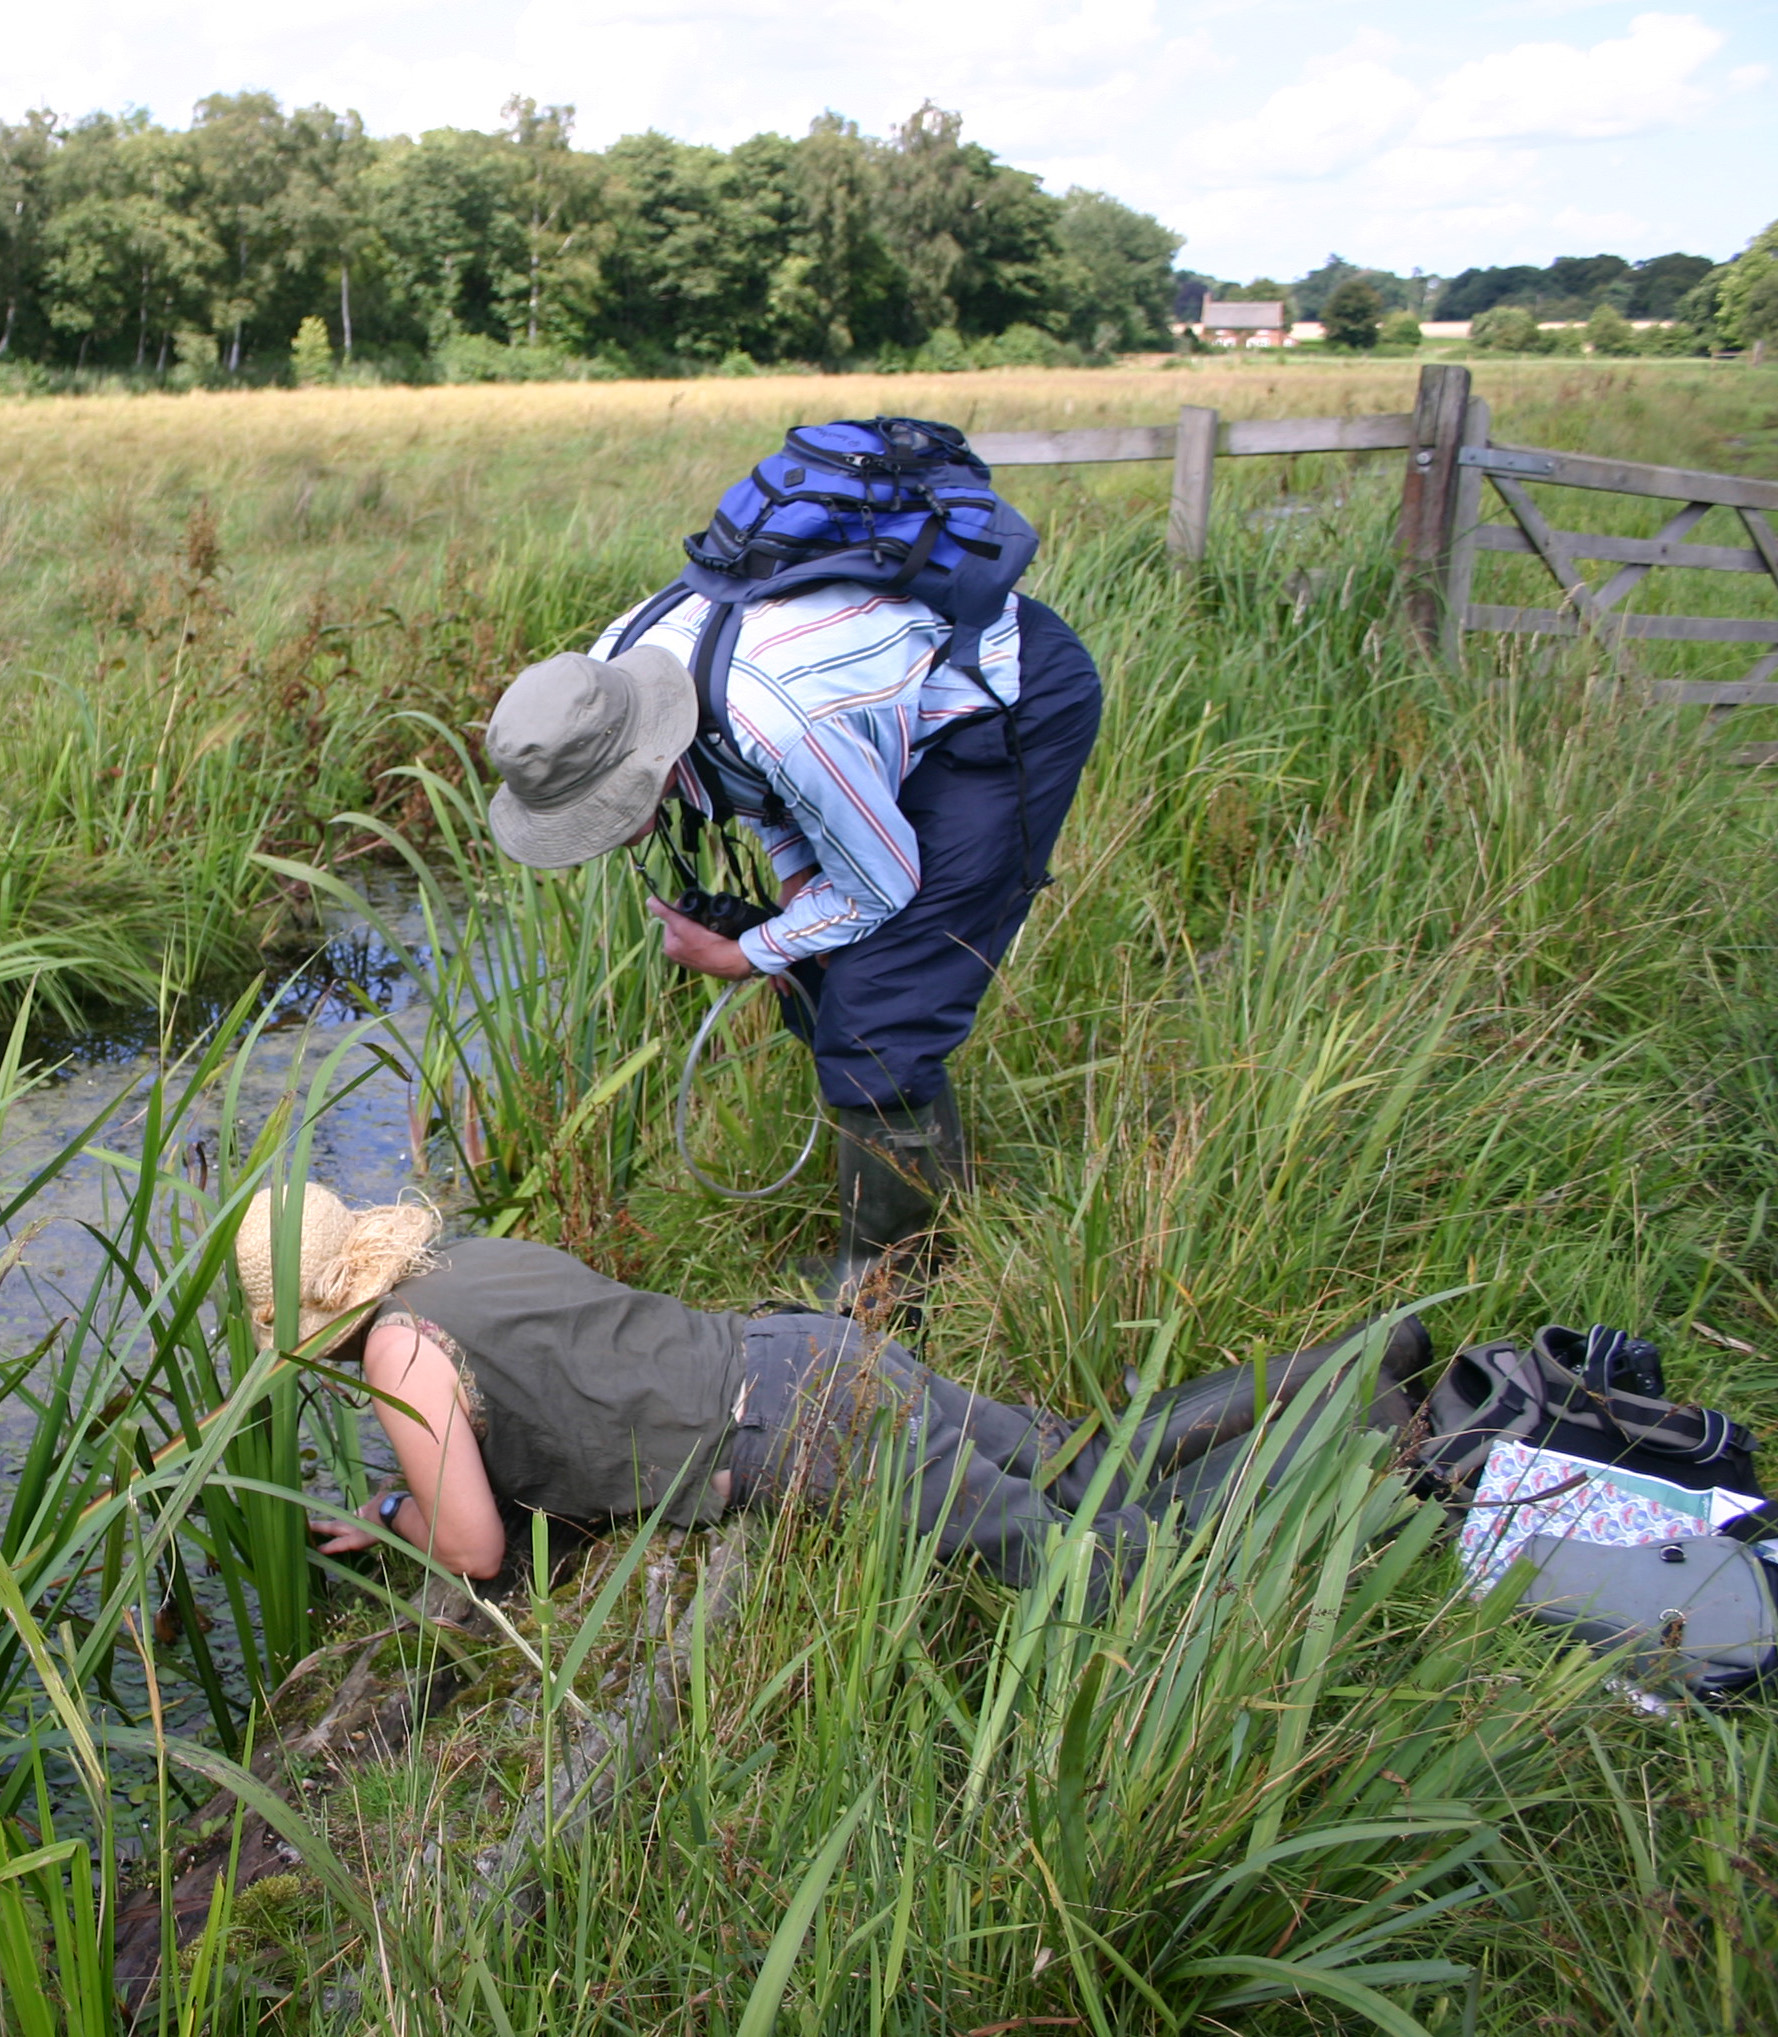 British Arachnological Society volunteers searched for overlooked populations